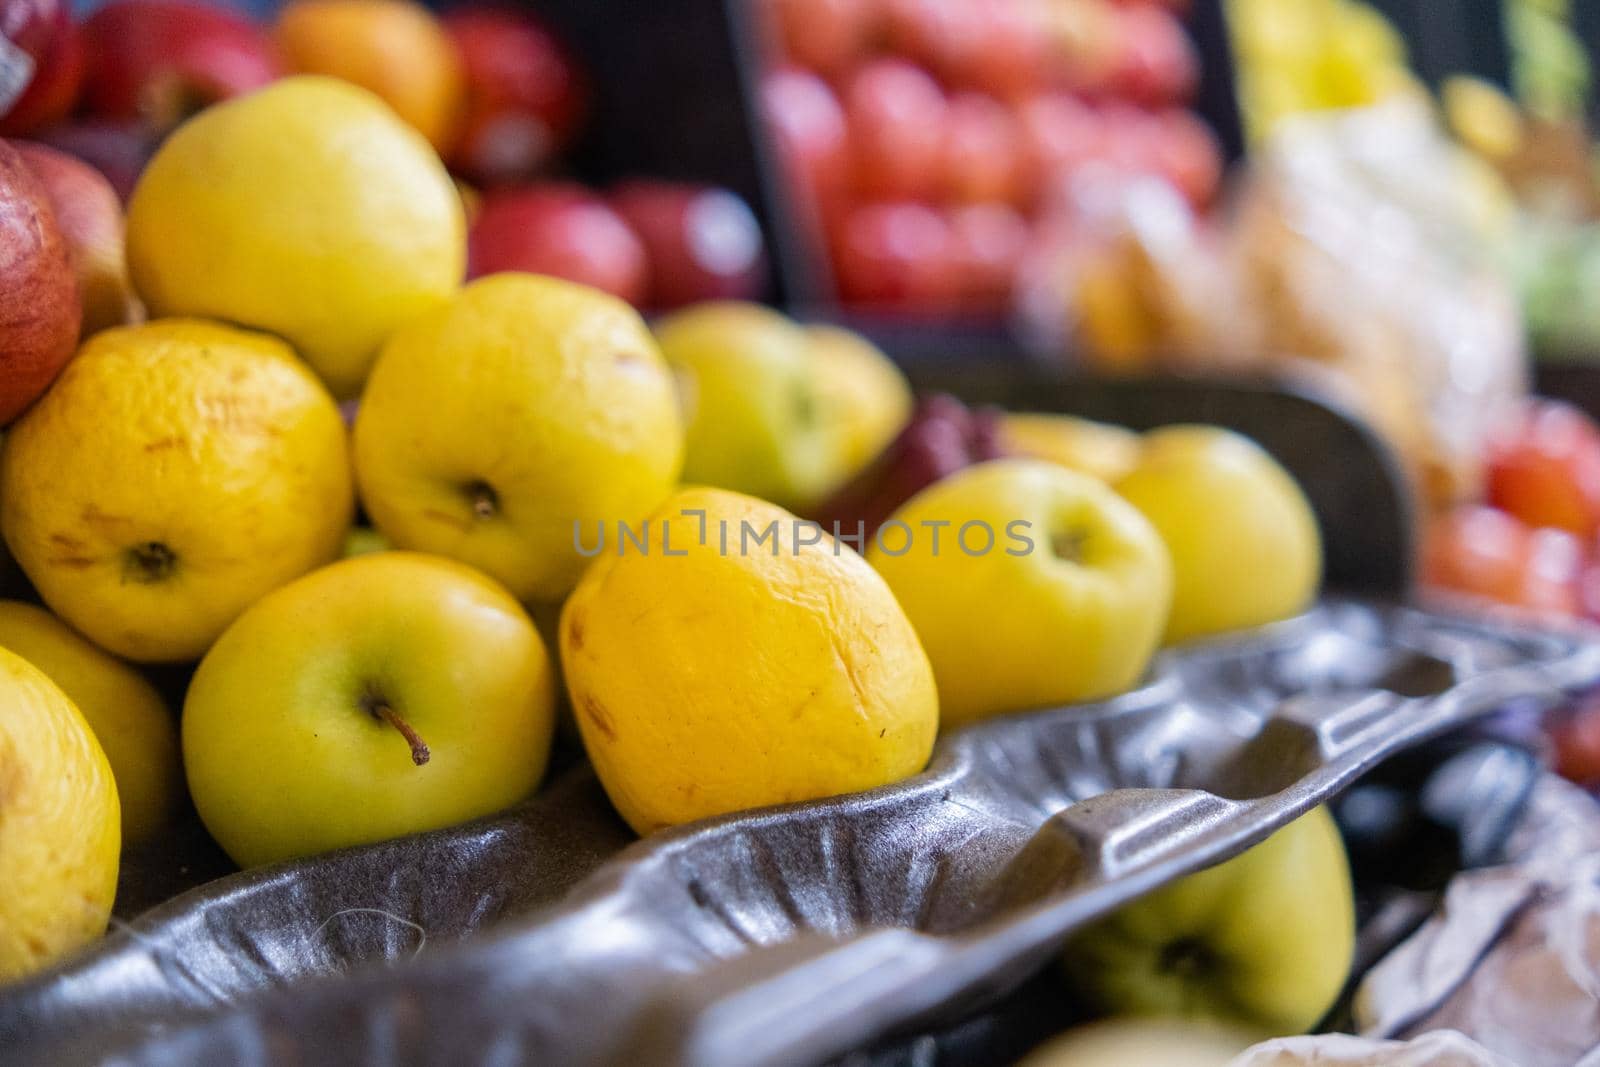 Close-up of colorful fruit stand with fresh yellow and red apples, and more. Juicy-looking fruit for sale on stall with blurry background inside classic Mexican market. Healthy food